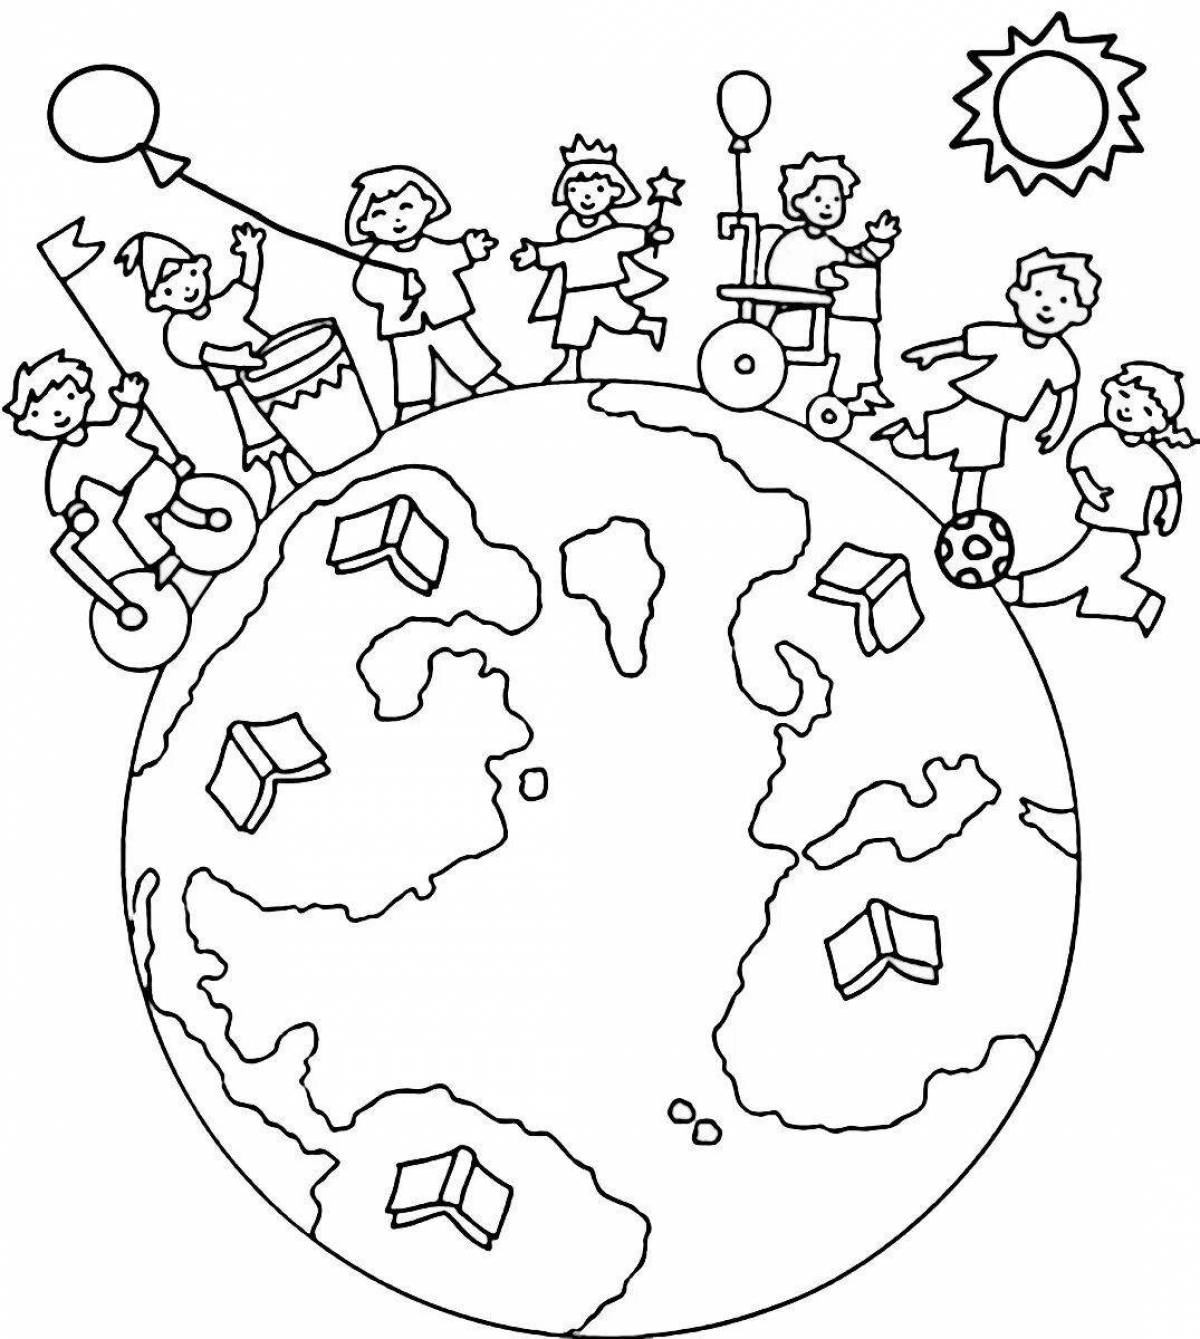 Coloring page bizarre world on earth